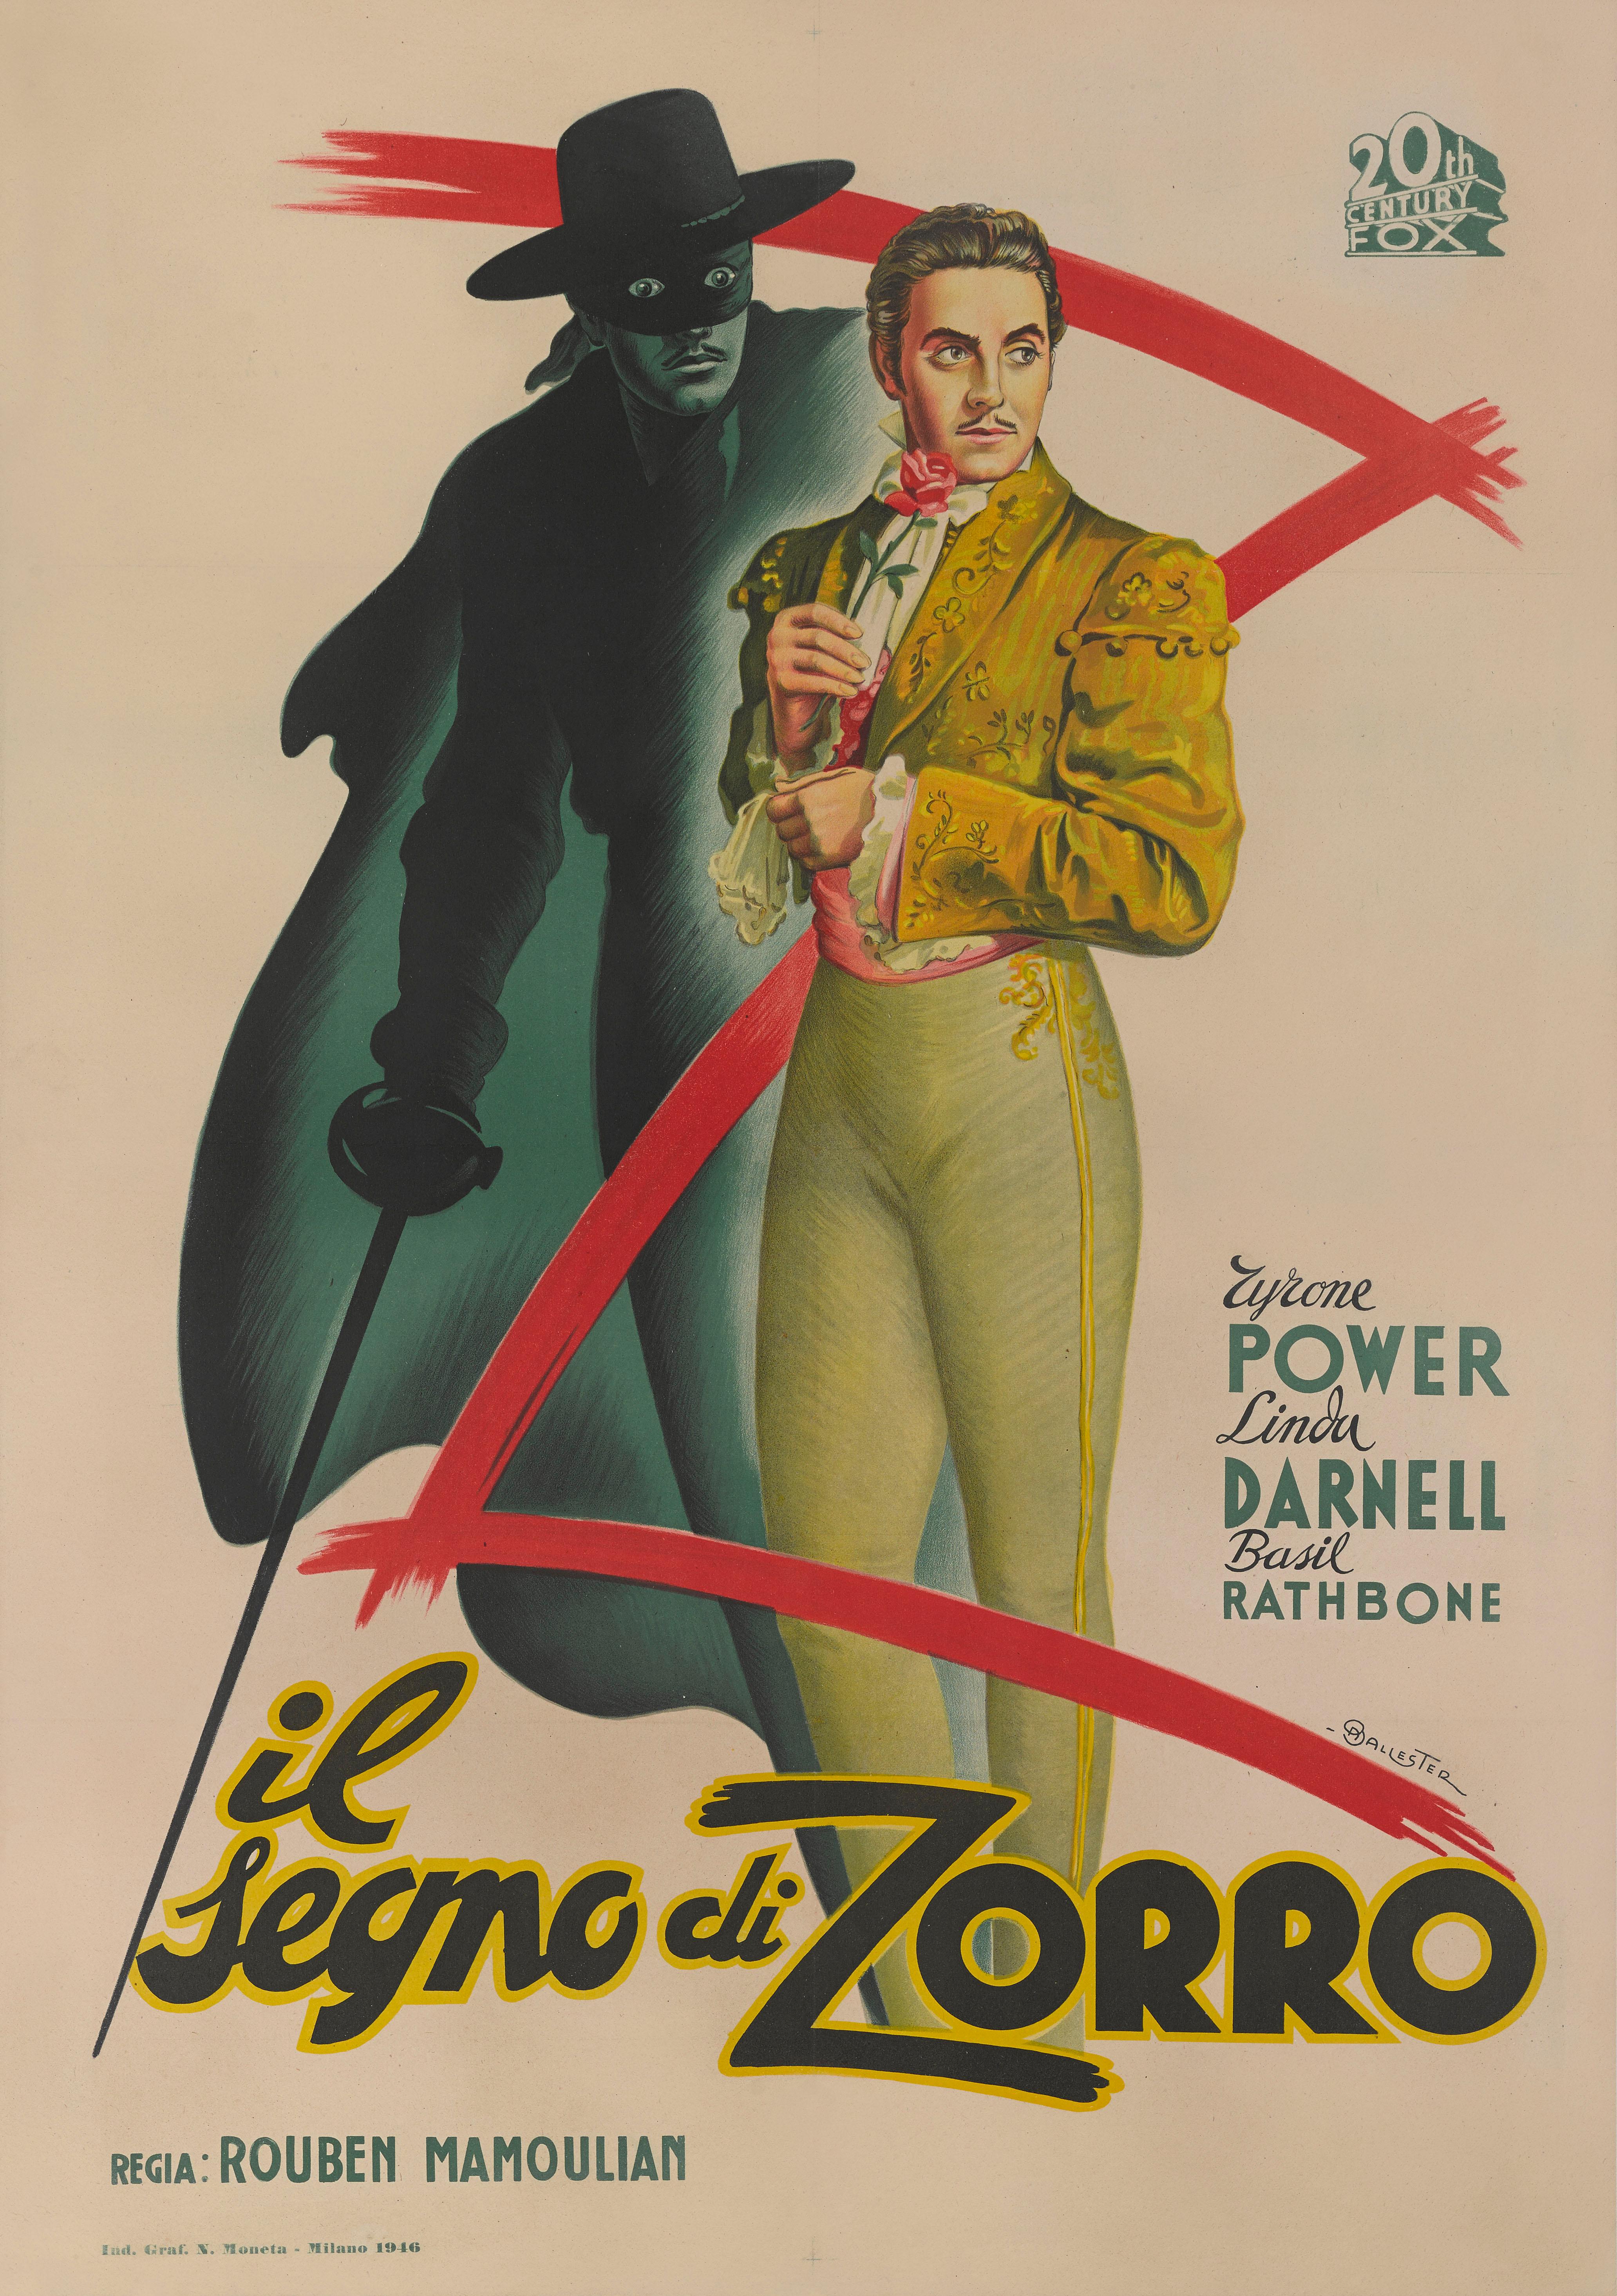 Original Italian film poster for the 1940 adventure romance film The Mark of Zorro.
This film was directed by Rouben Mamoulian The cast includes Tyrone Power, Linda Darnell and Basil Rathbone.
This is an exceptionally rare poster, the artwork on